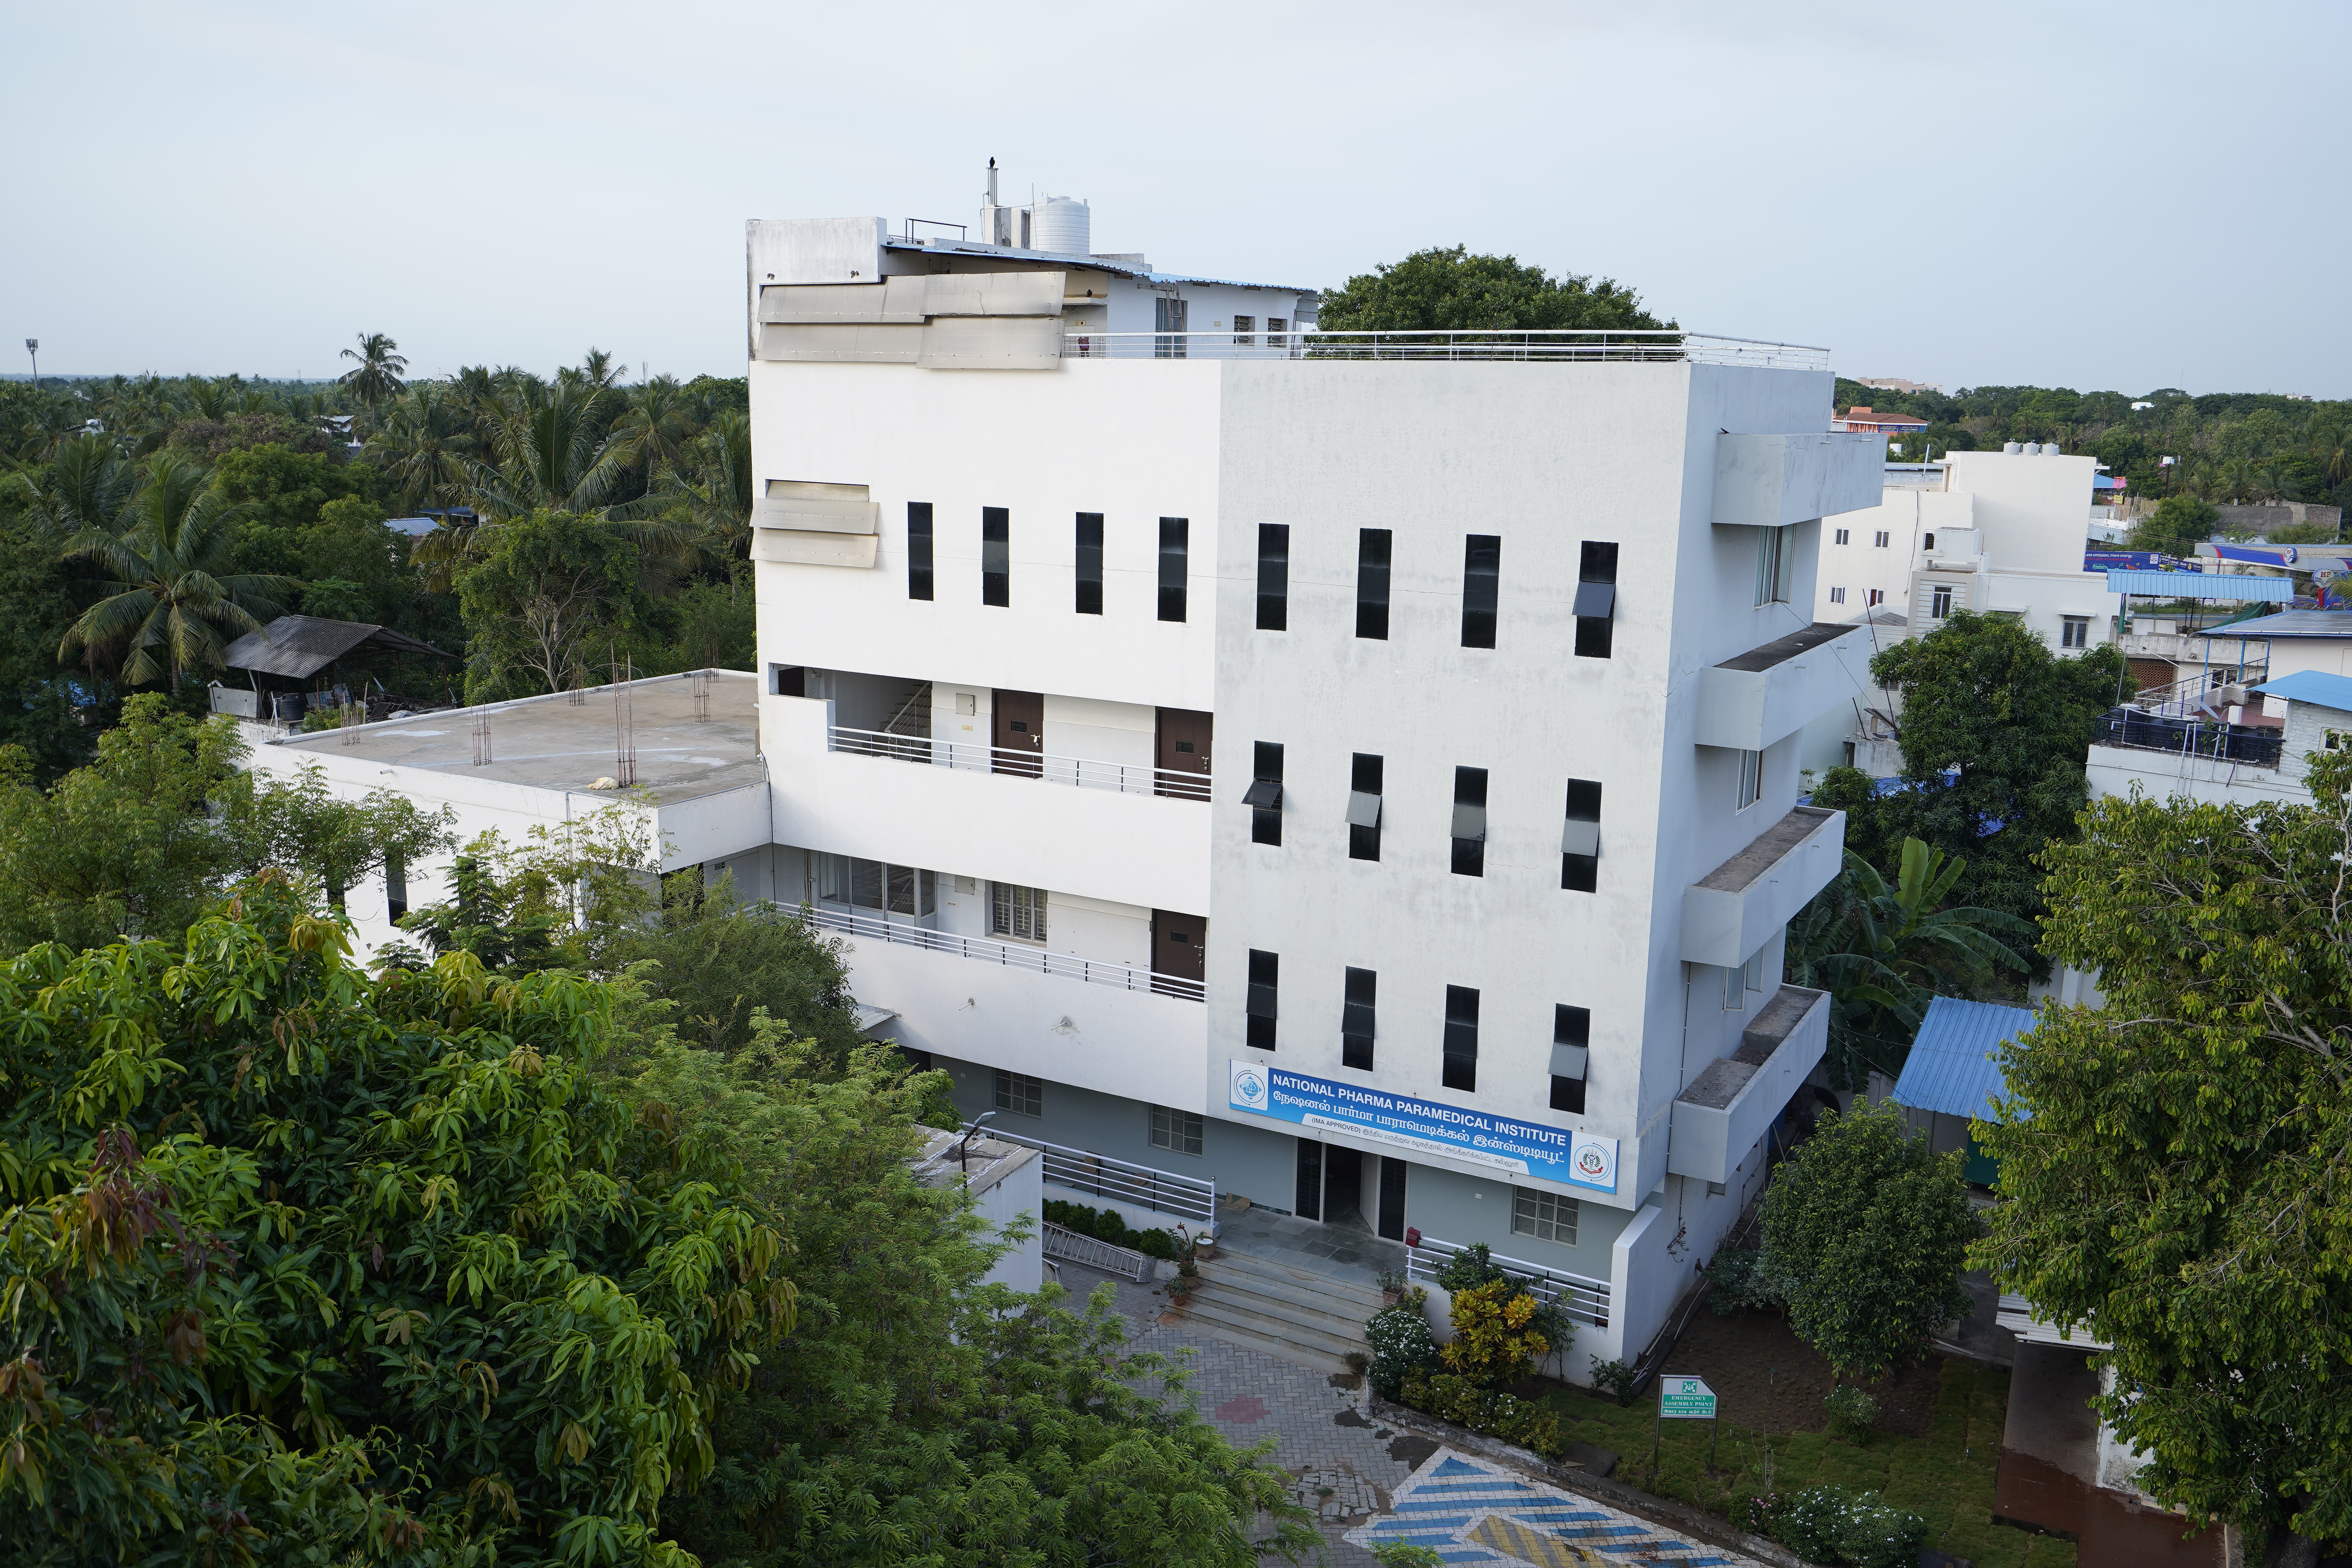 NATIONAL PHARMA HOSPITAL & RESEARCH INSTITUTE 